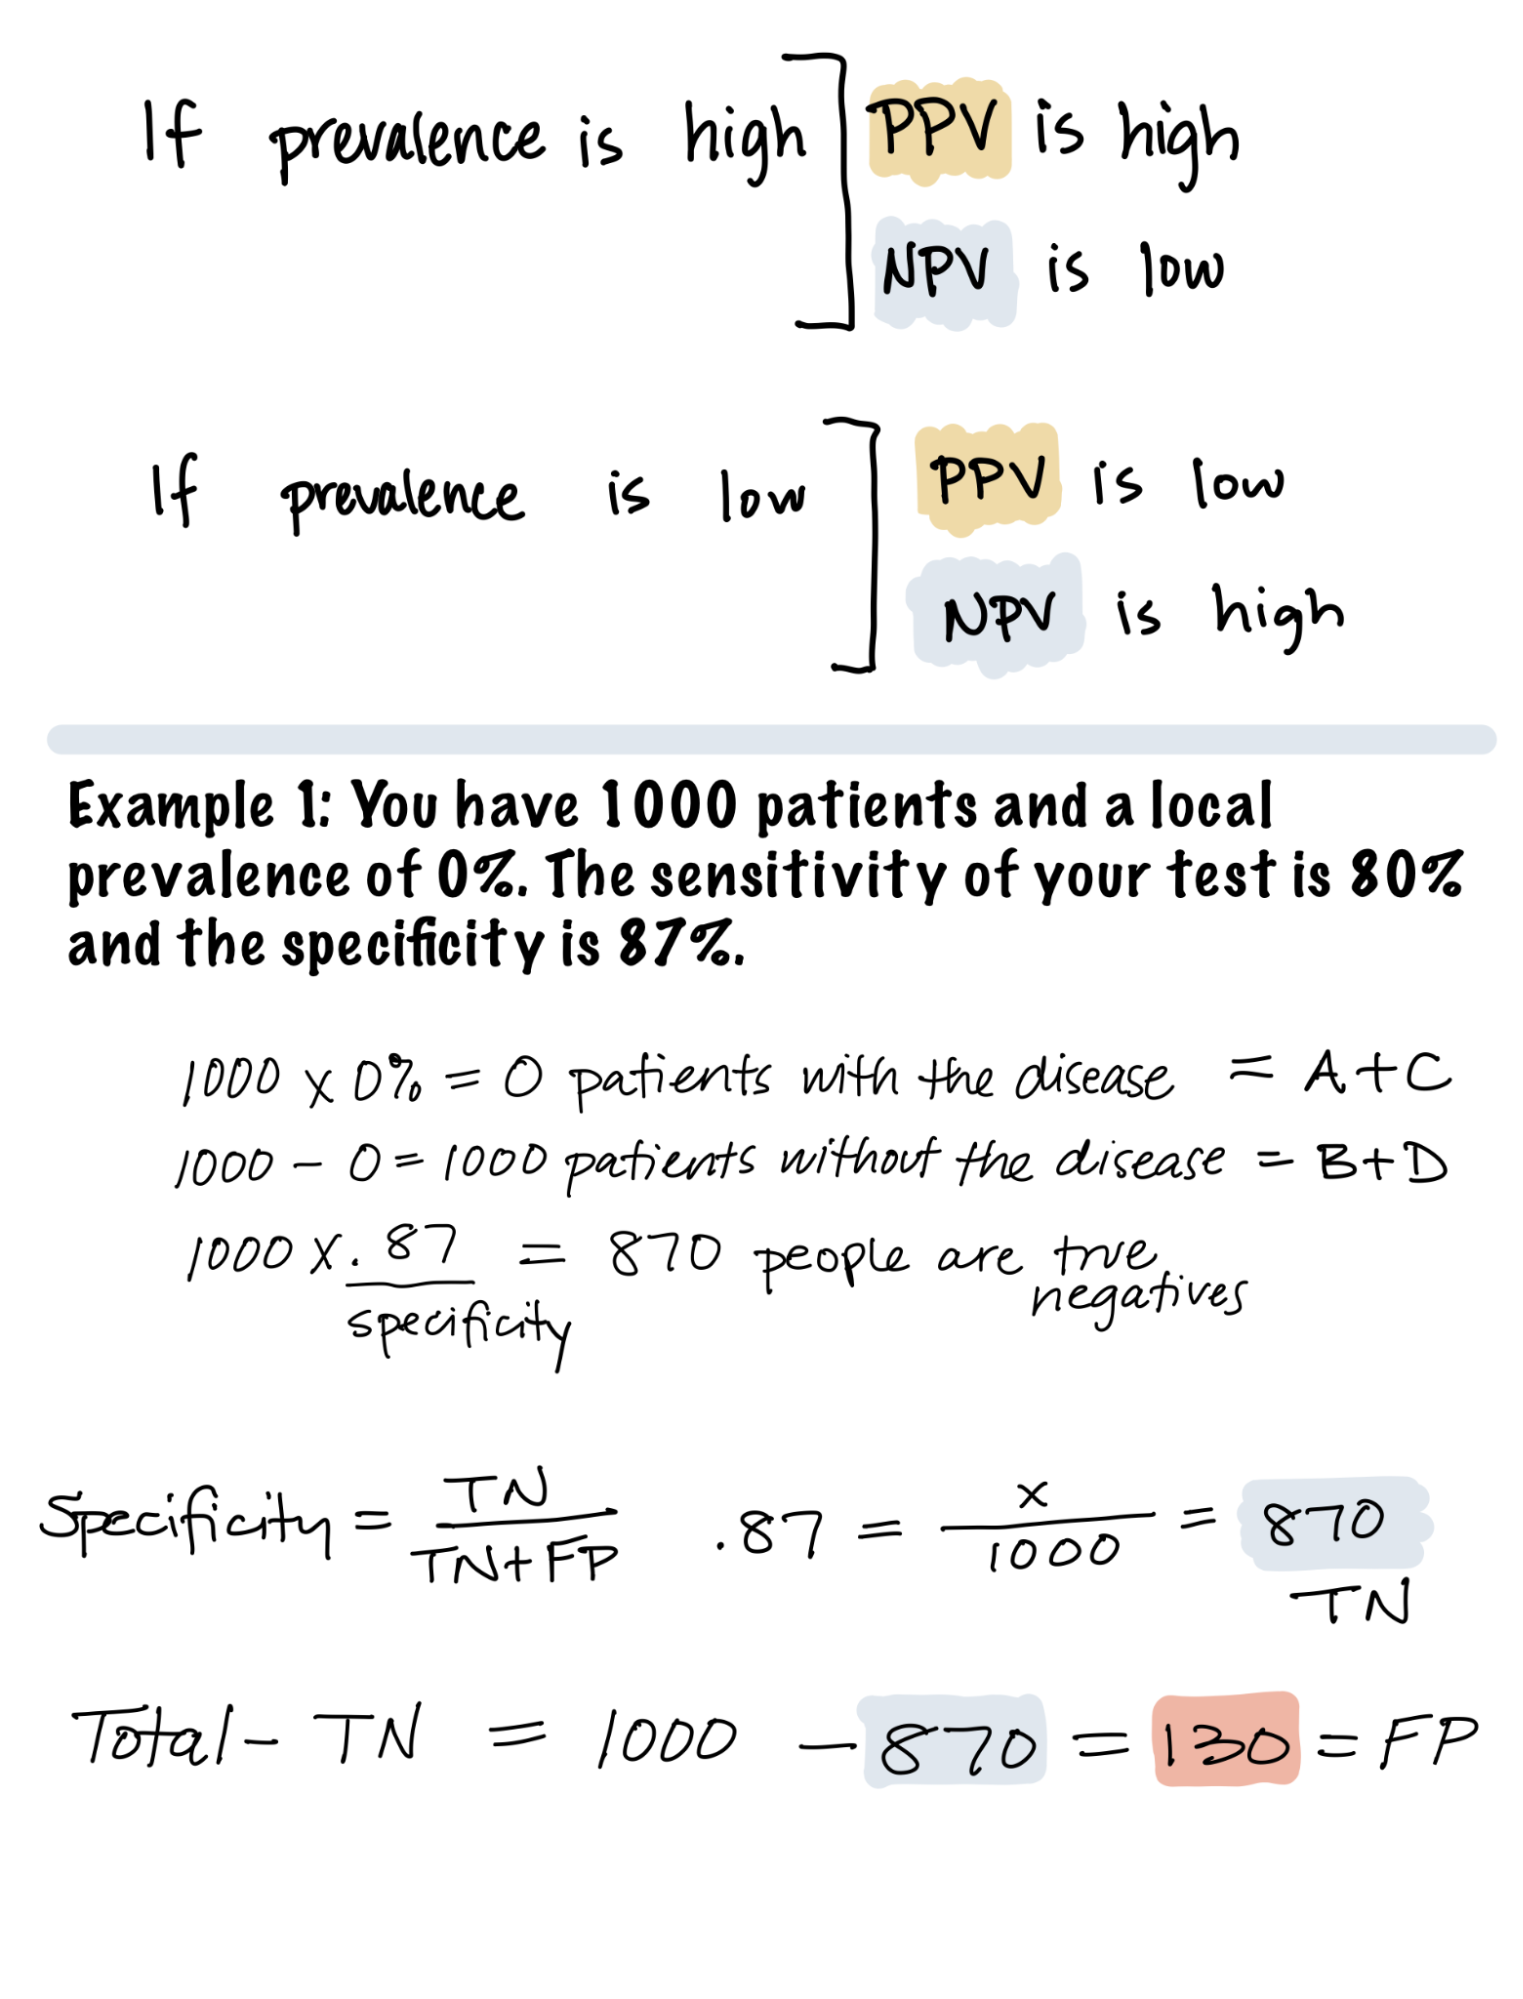 If prevalence is high, PPV is high and NPV is low. If prevalence is low, PPV is low and NPV is high. Example 1: You have 1000 patients and a local prevalence of 0%. The sensitivity of your test is 80% and the specificity if 87%. 1000*0% equals 0 patients with the disease (A+C). 1000-0 equals 1000 patients without the disease (B+D). 1000*0.87 equals 870 people who are true negatives. Specificity equals TN/(TN+FP). 0.87 equals x/1000, so there are 870 TN. Total minus TN equals 1000 minus 870, so there are 130 FP.